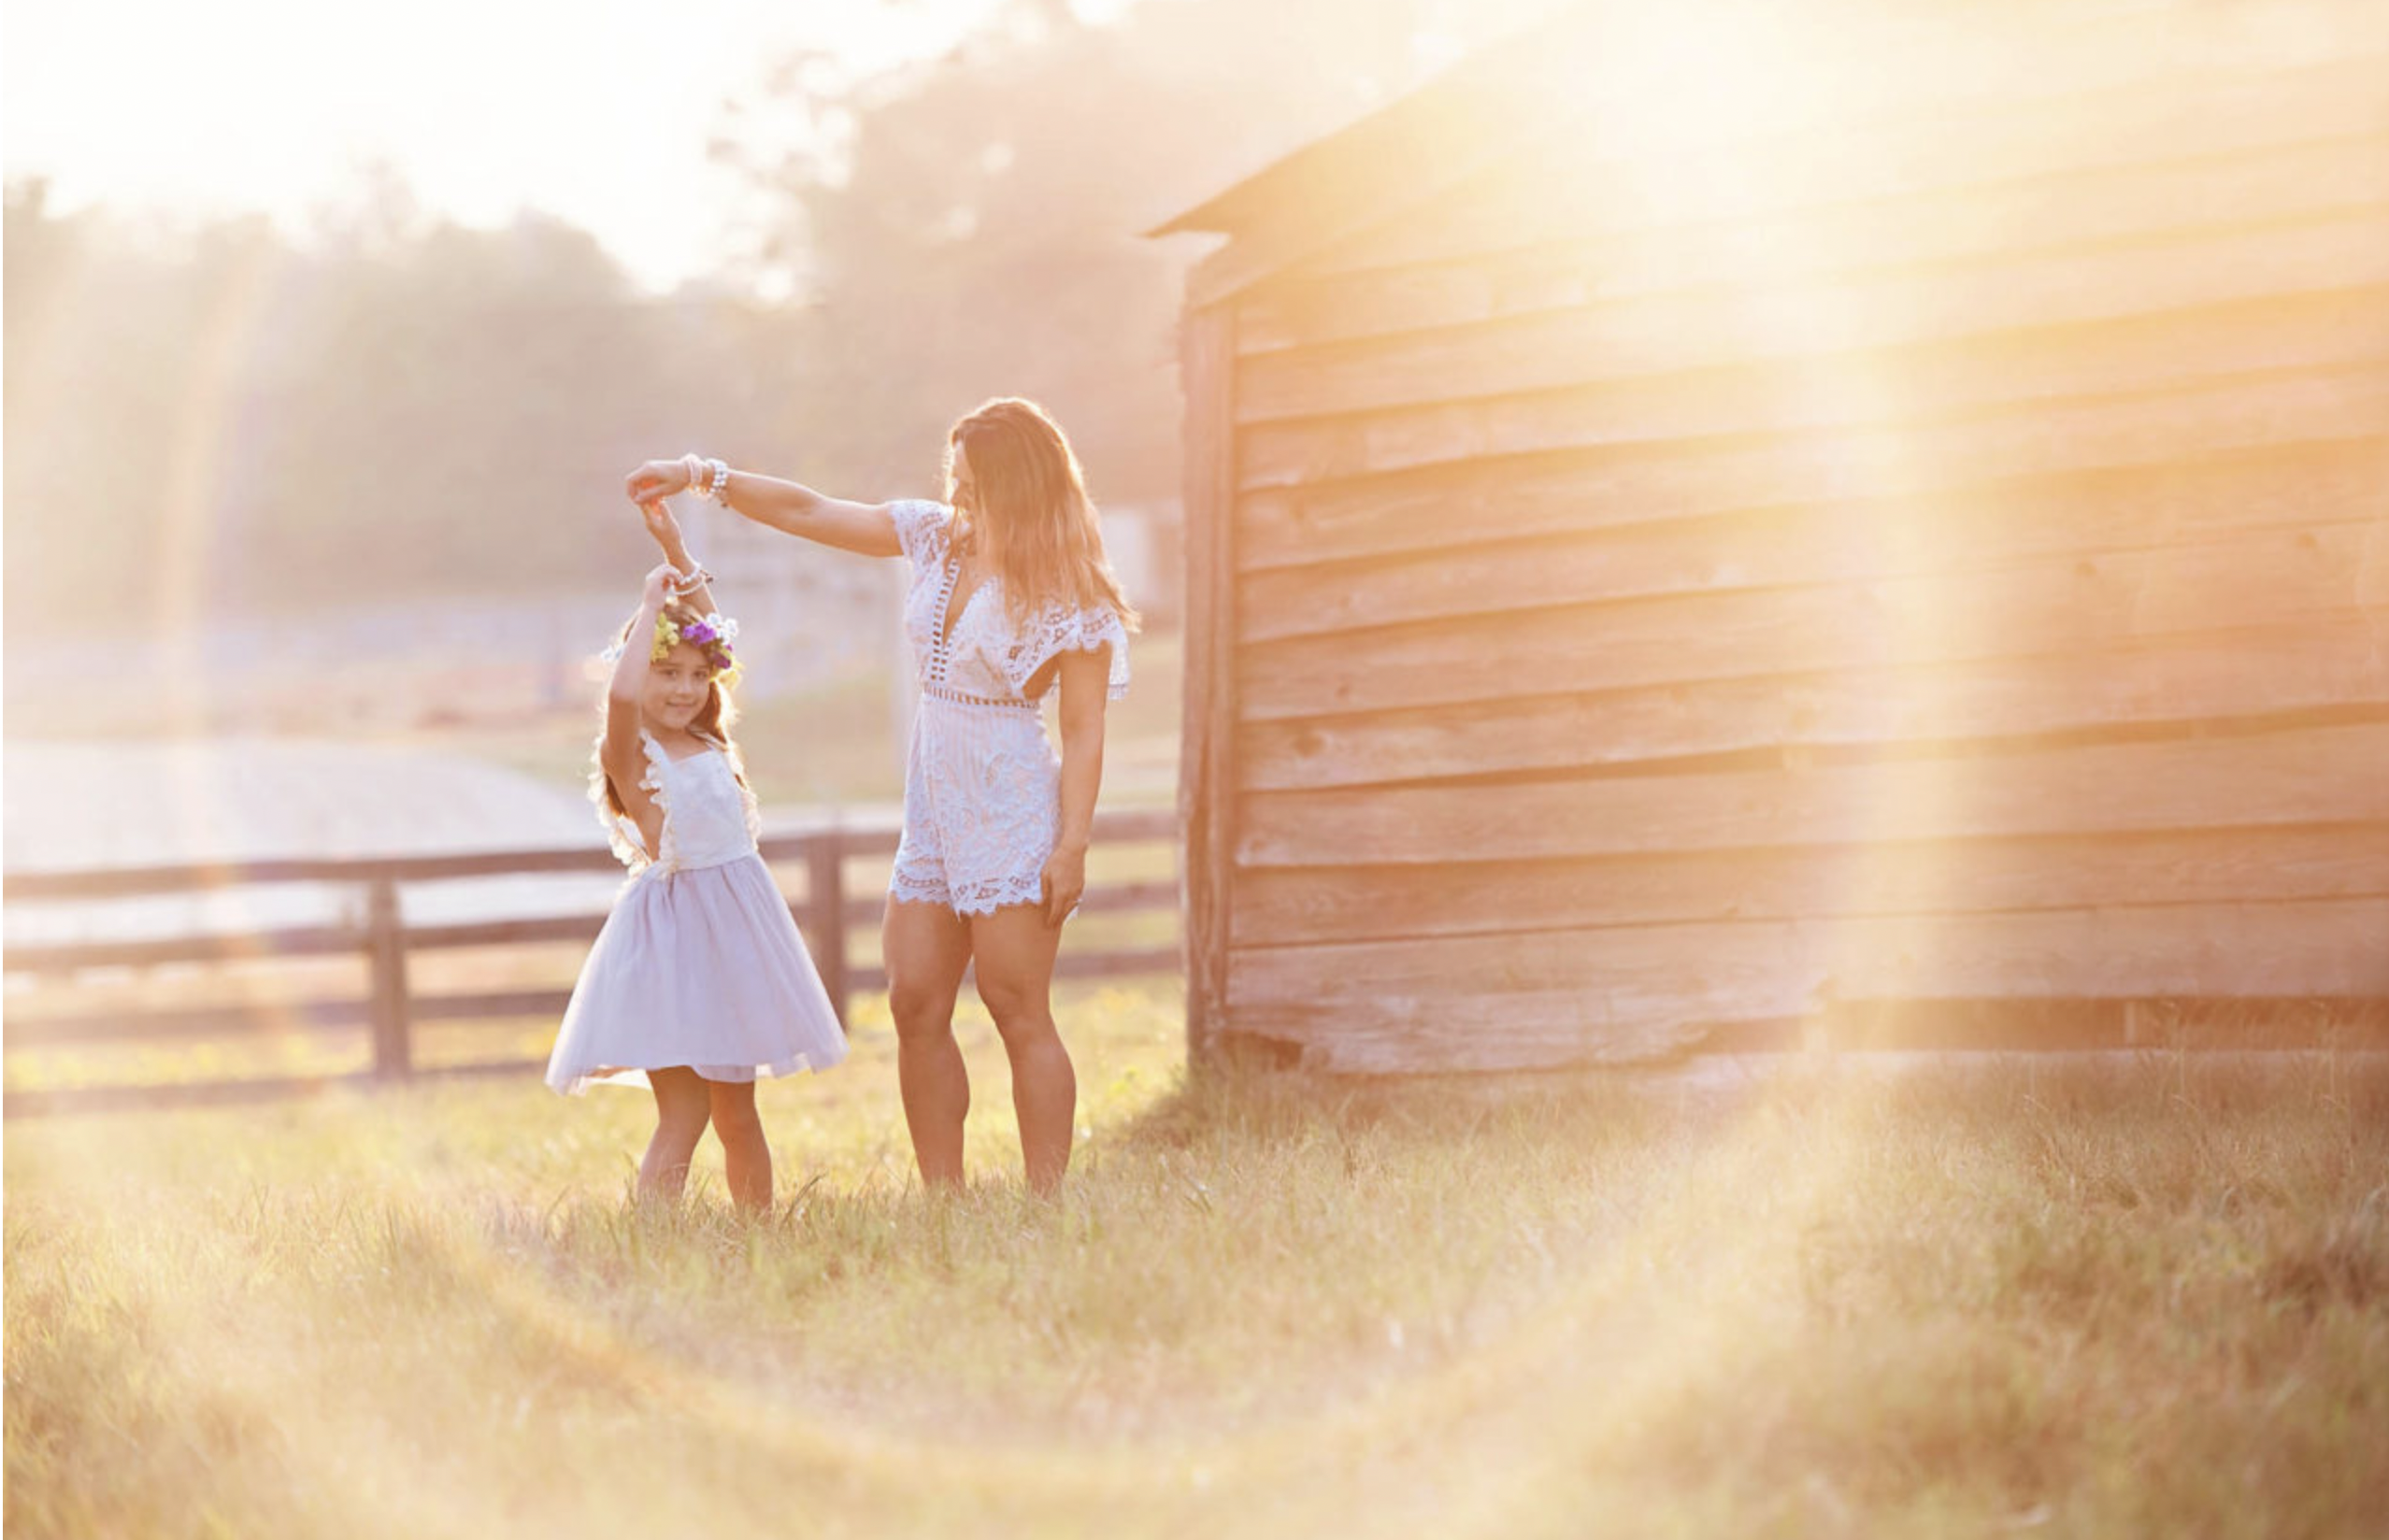 BECAUSE I CARE … INSIDE THE MIND OF A FAMILY PHOTOGRAPHER